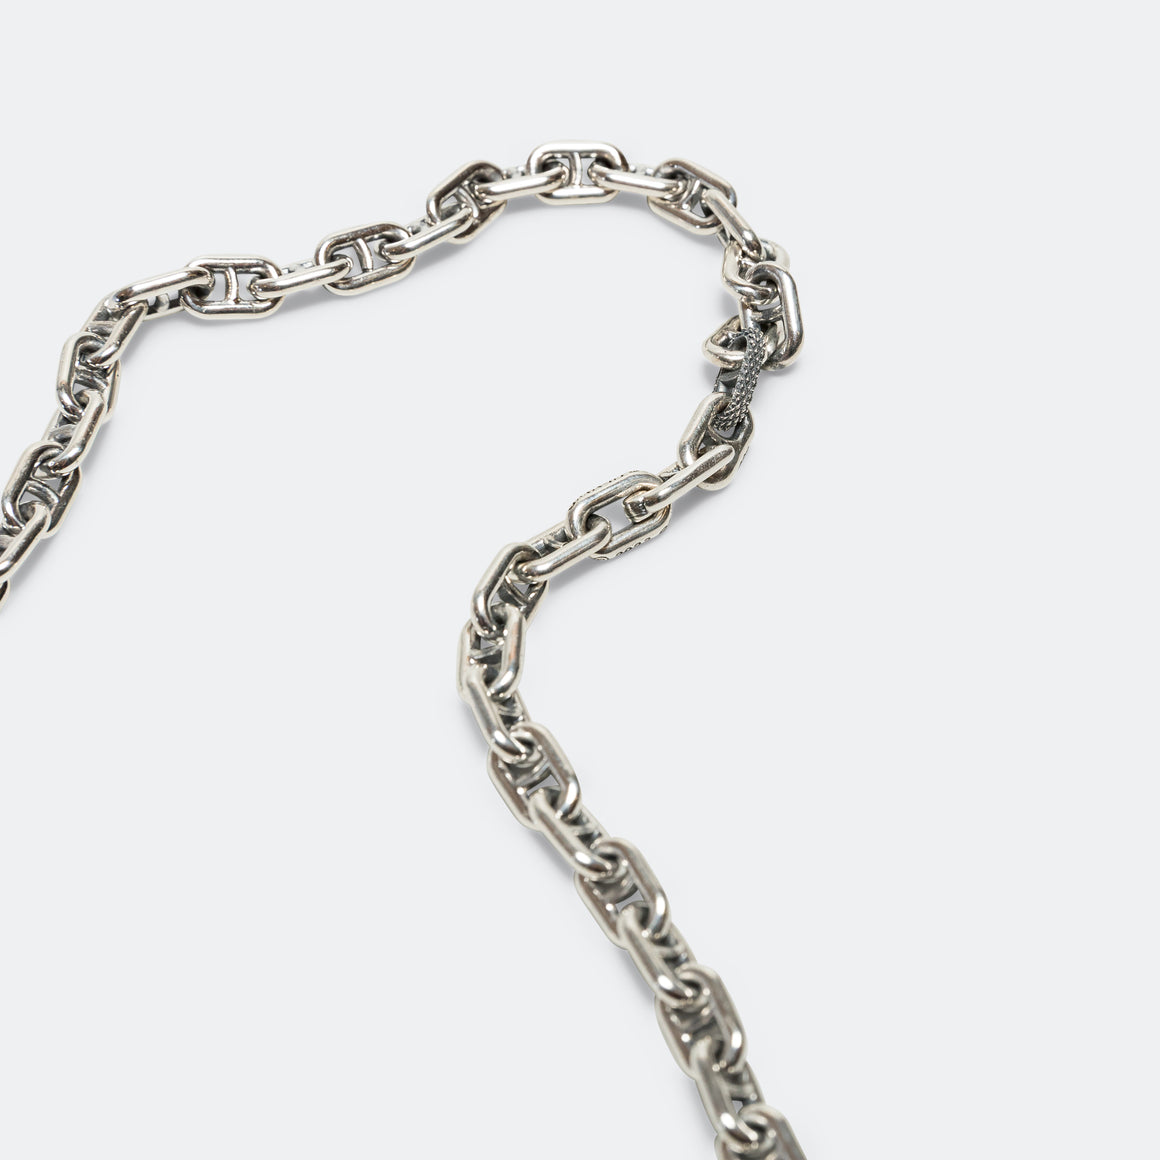 Model 22 Necklace - 3A - 925 Silver